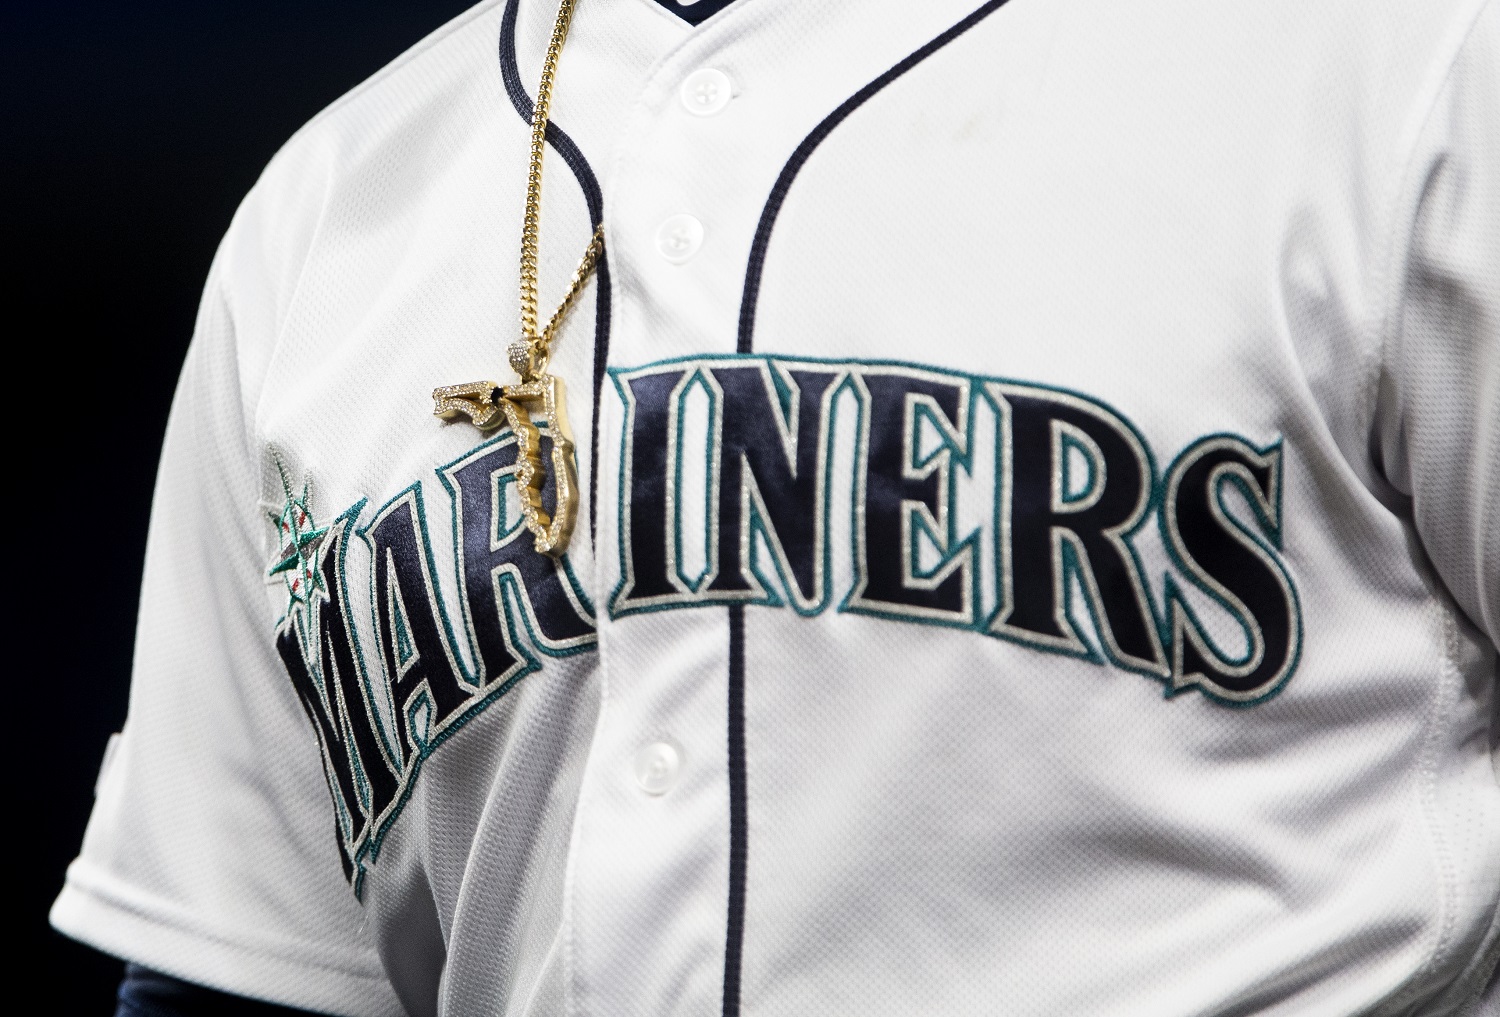 Seattle Mariners CEO Kevin Mather’s Blunder Could Cost MLB Tens of Millions of Dollars